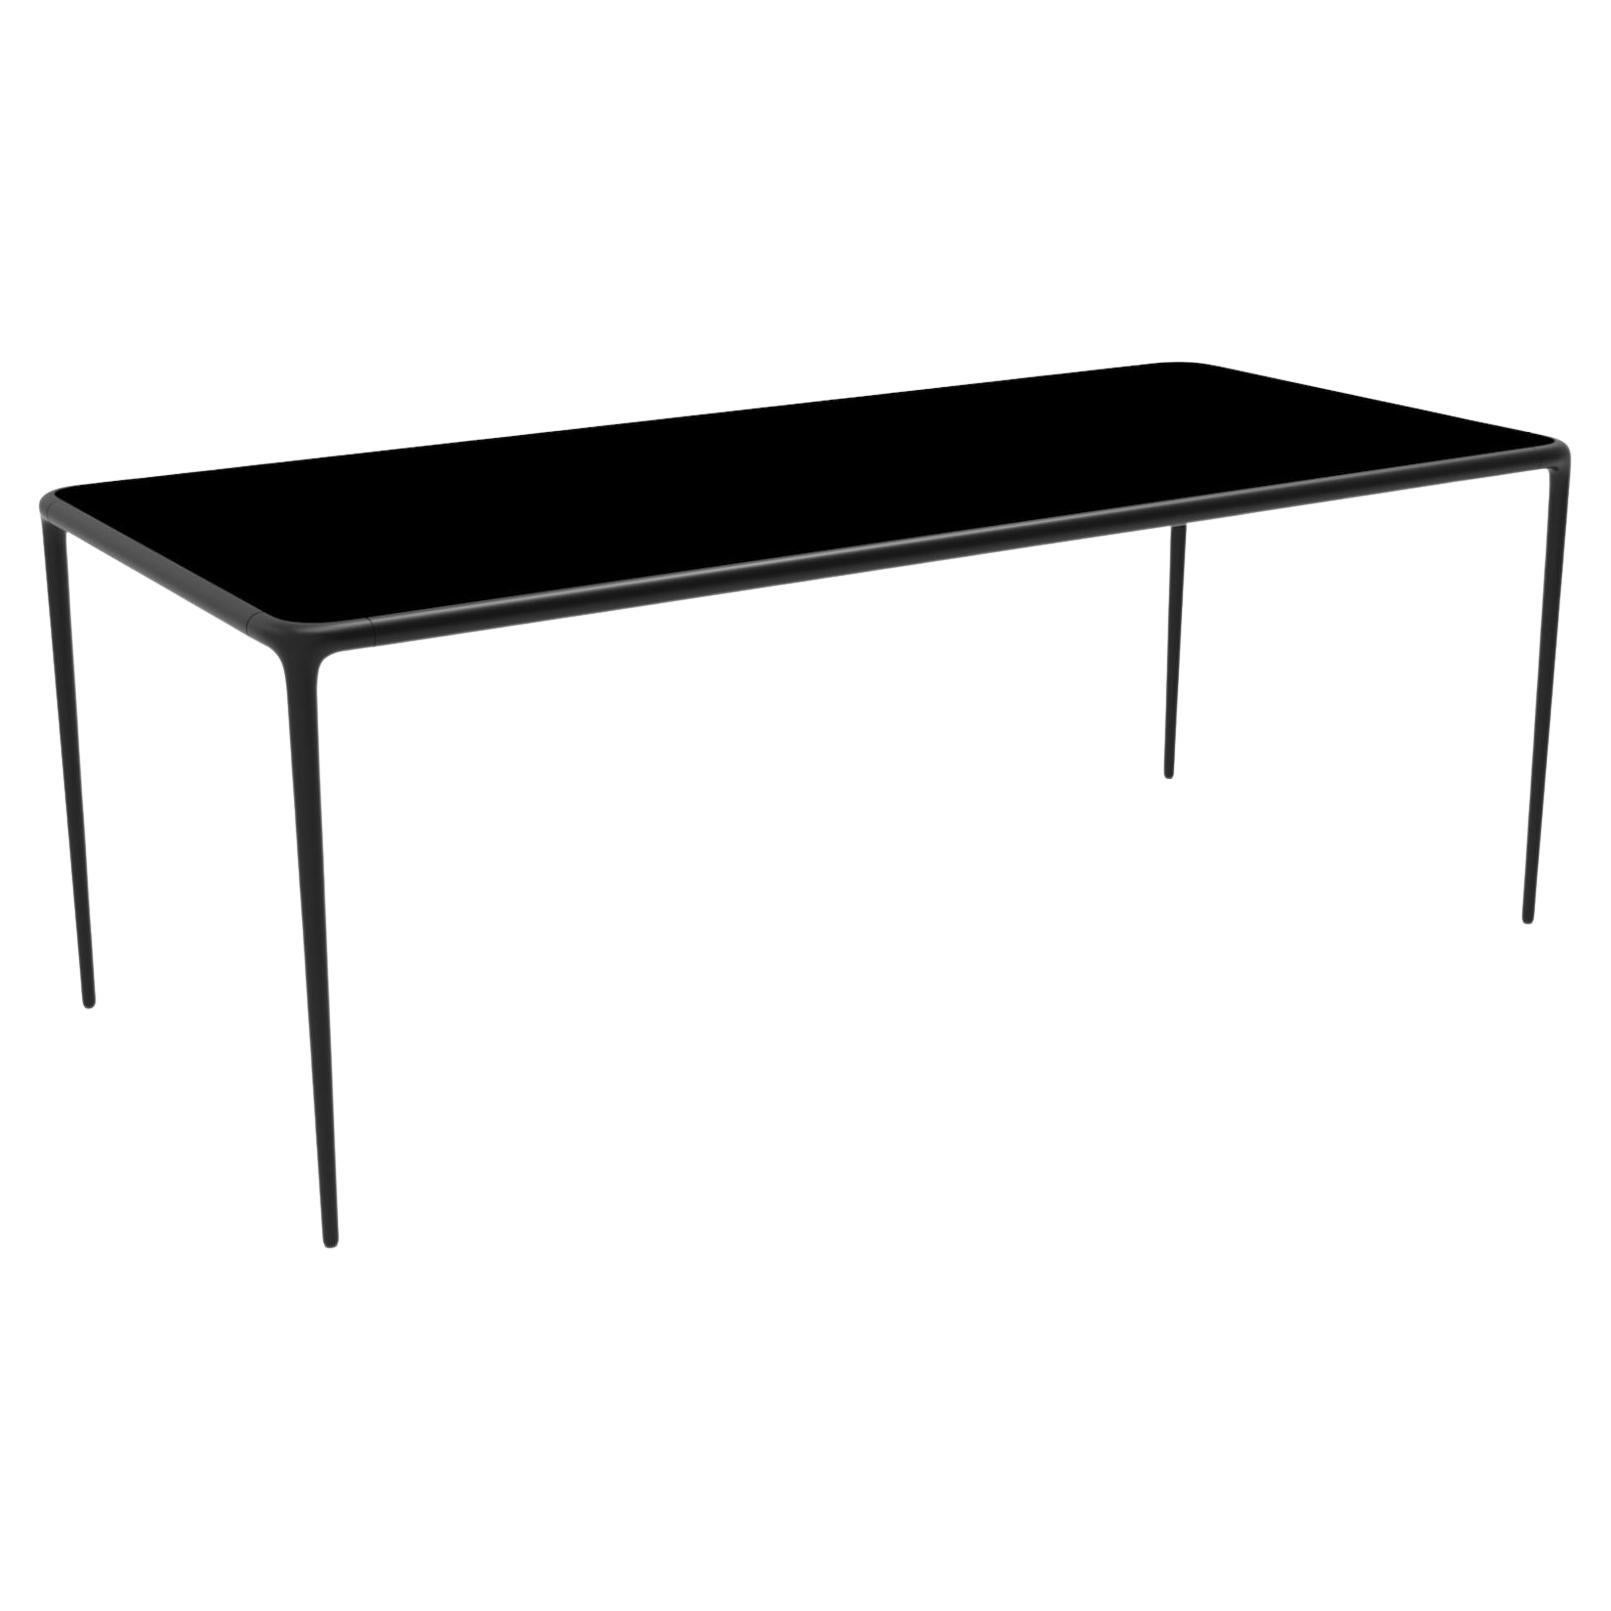 Xaloc Black Glass Top Table 200 by Mowee For Sale